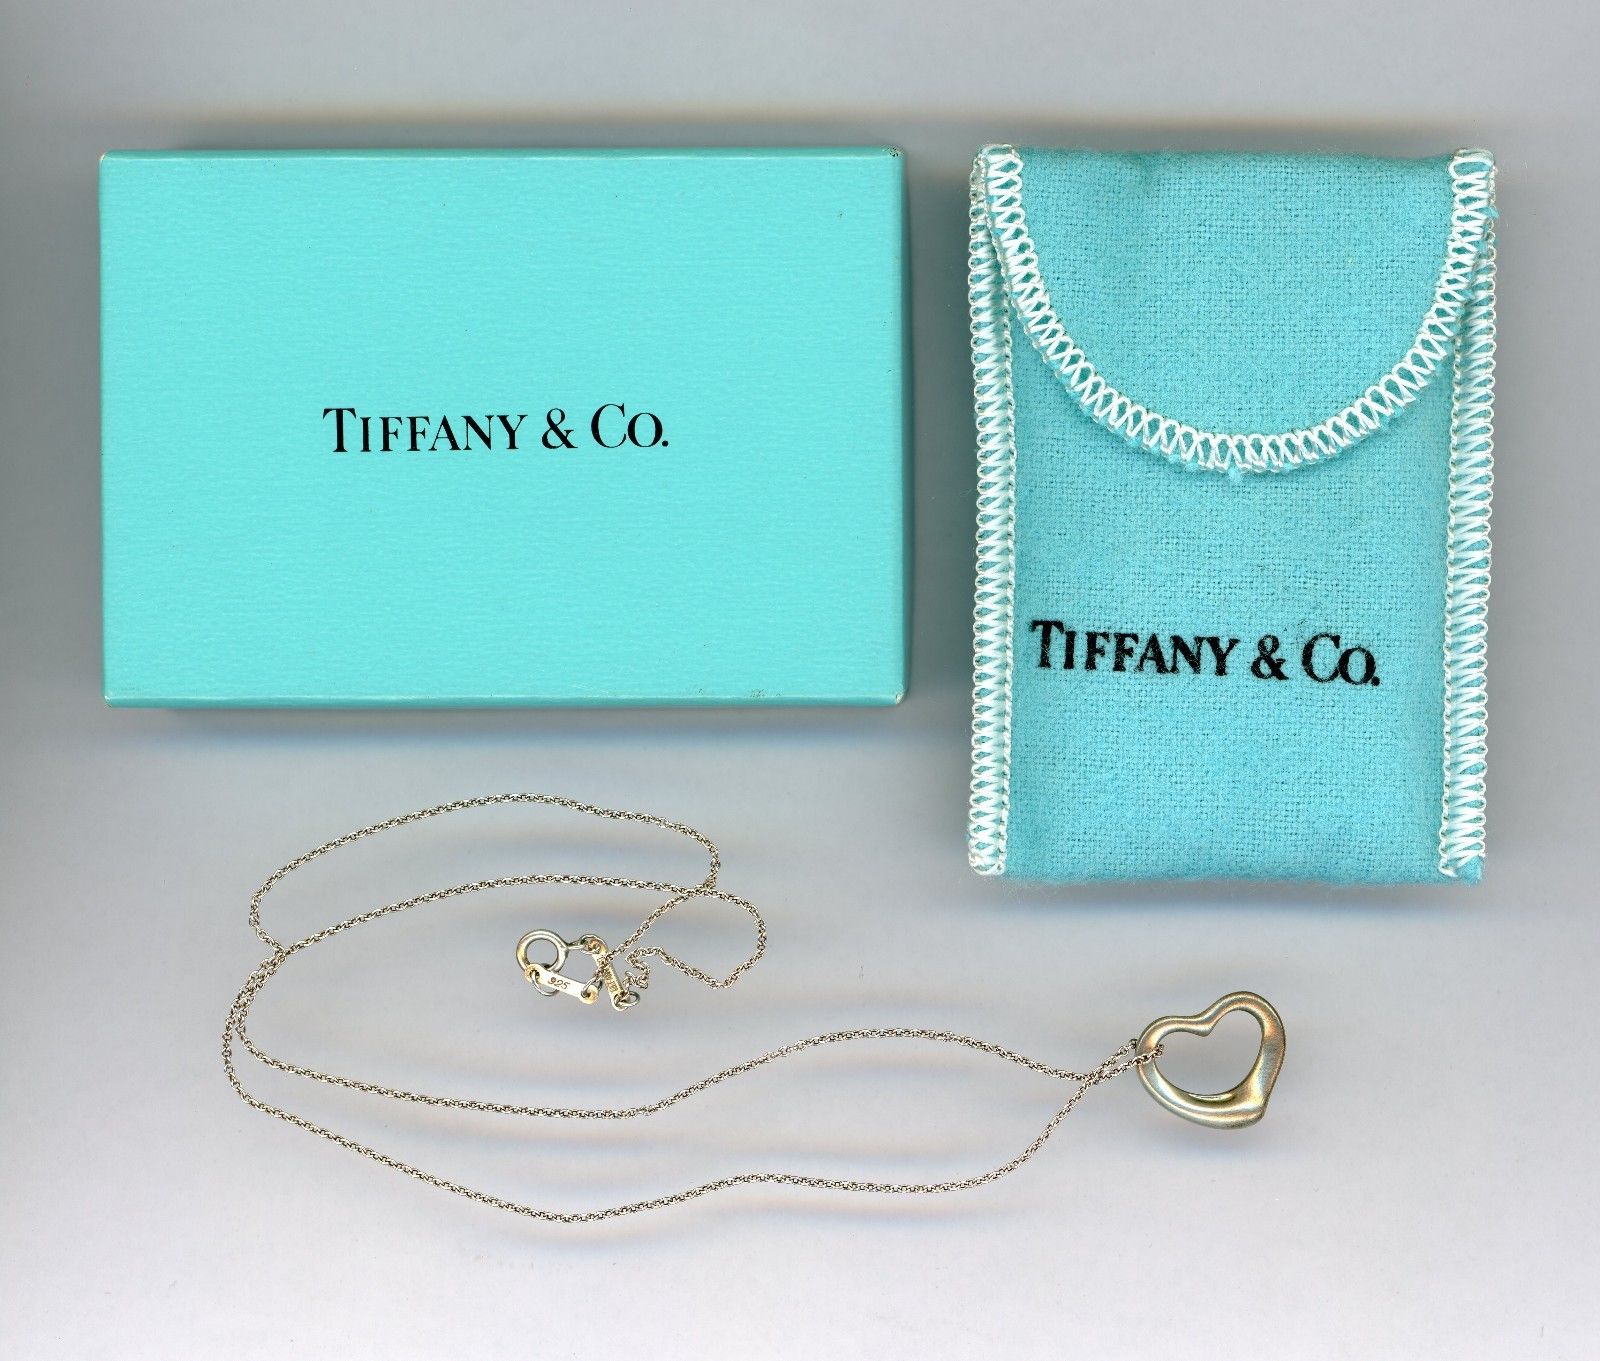 brands like tiffany and co